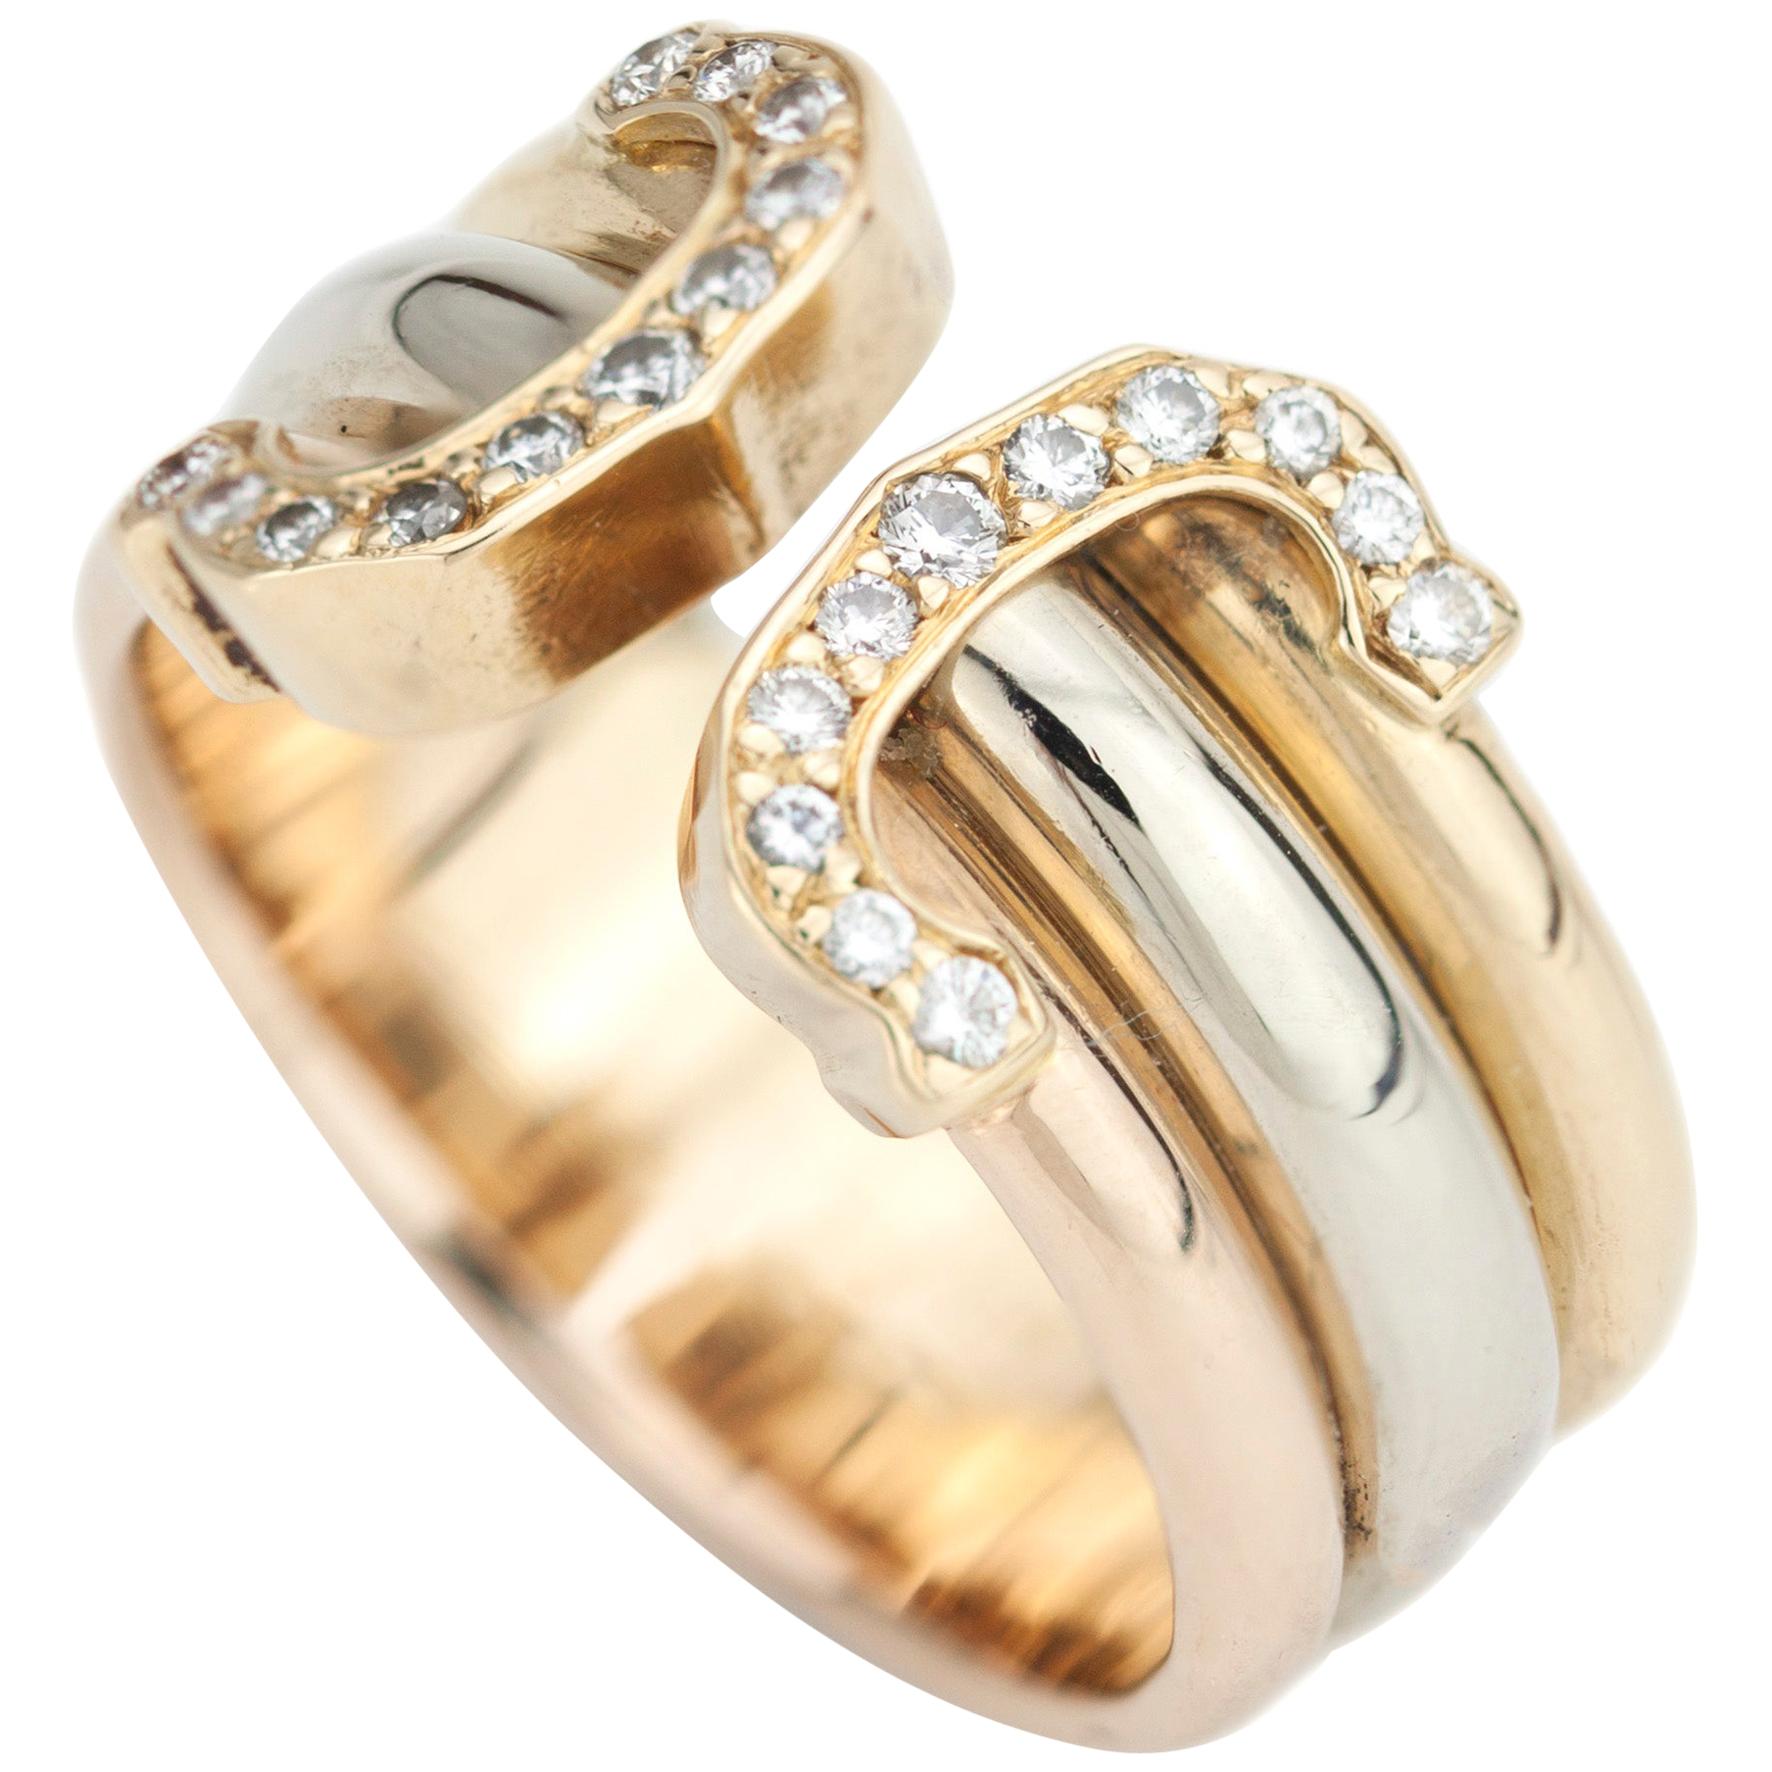 18kt Gold Ladies Cartier Ring with Diamonds, Made in France, Paris, circa 1990s